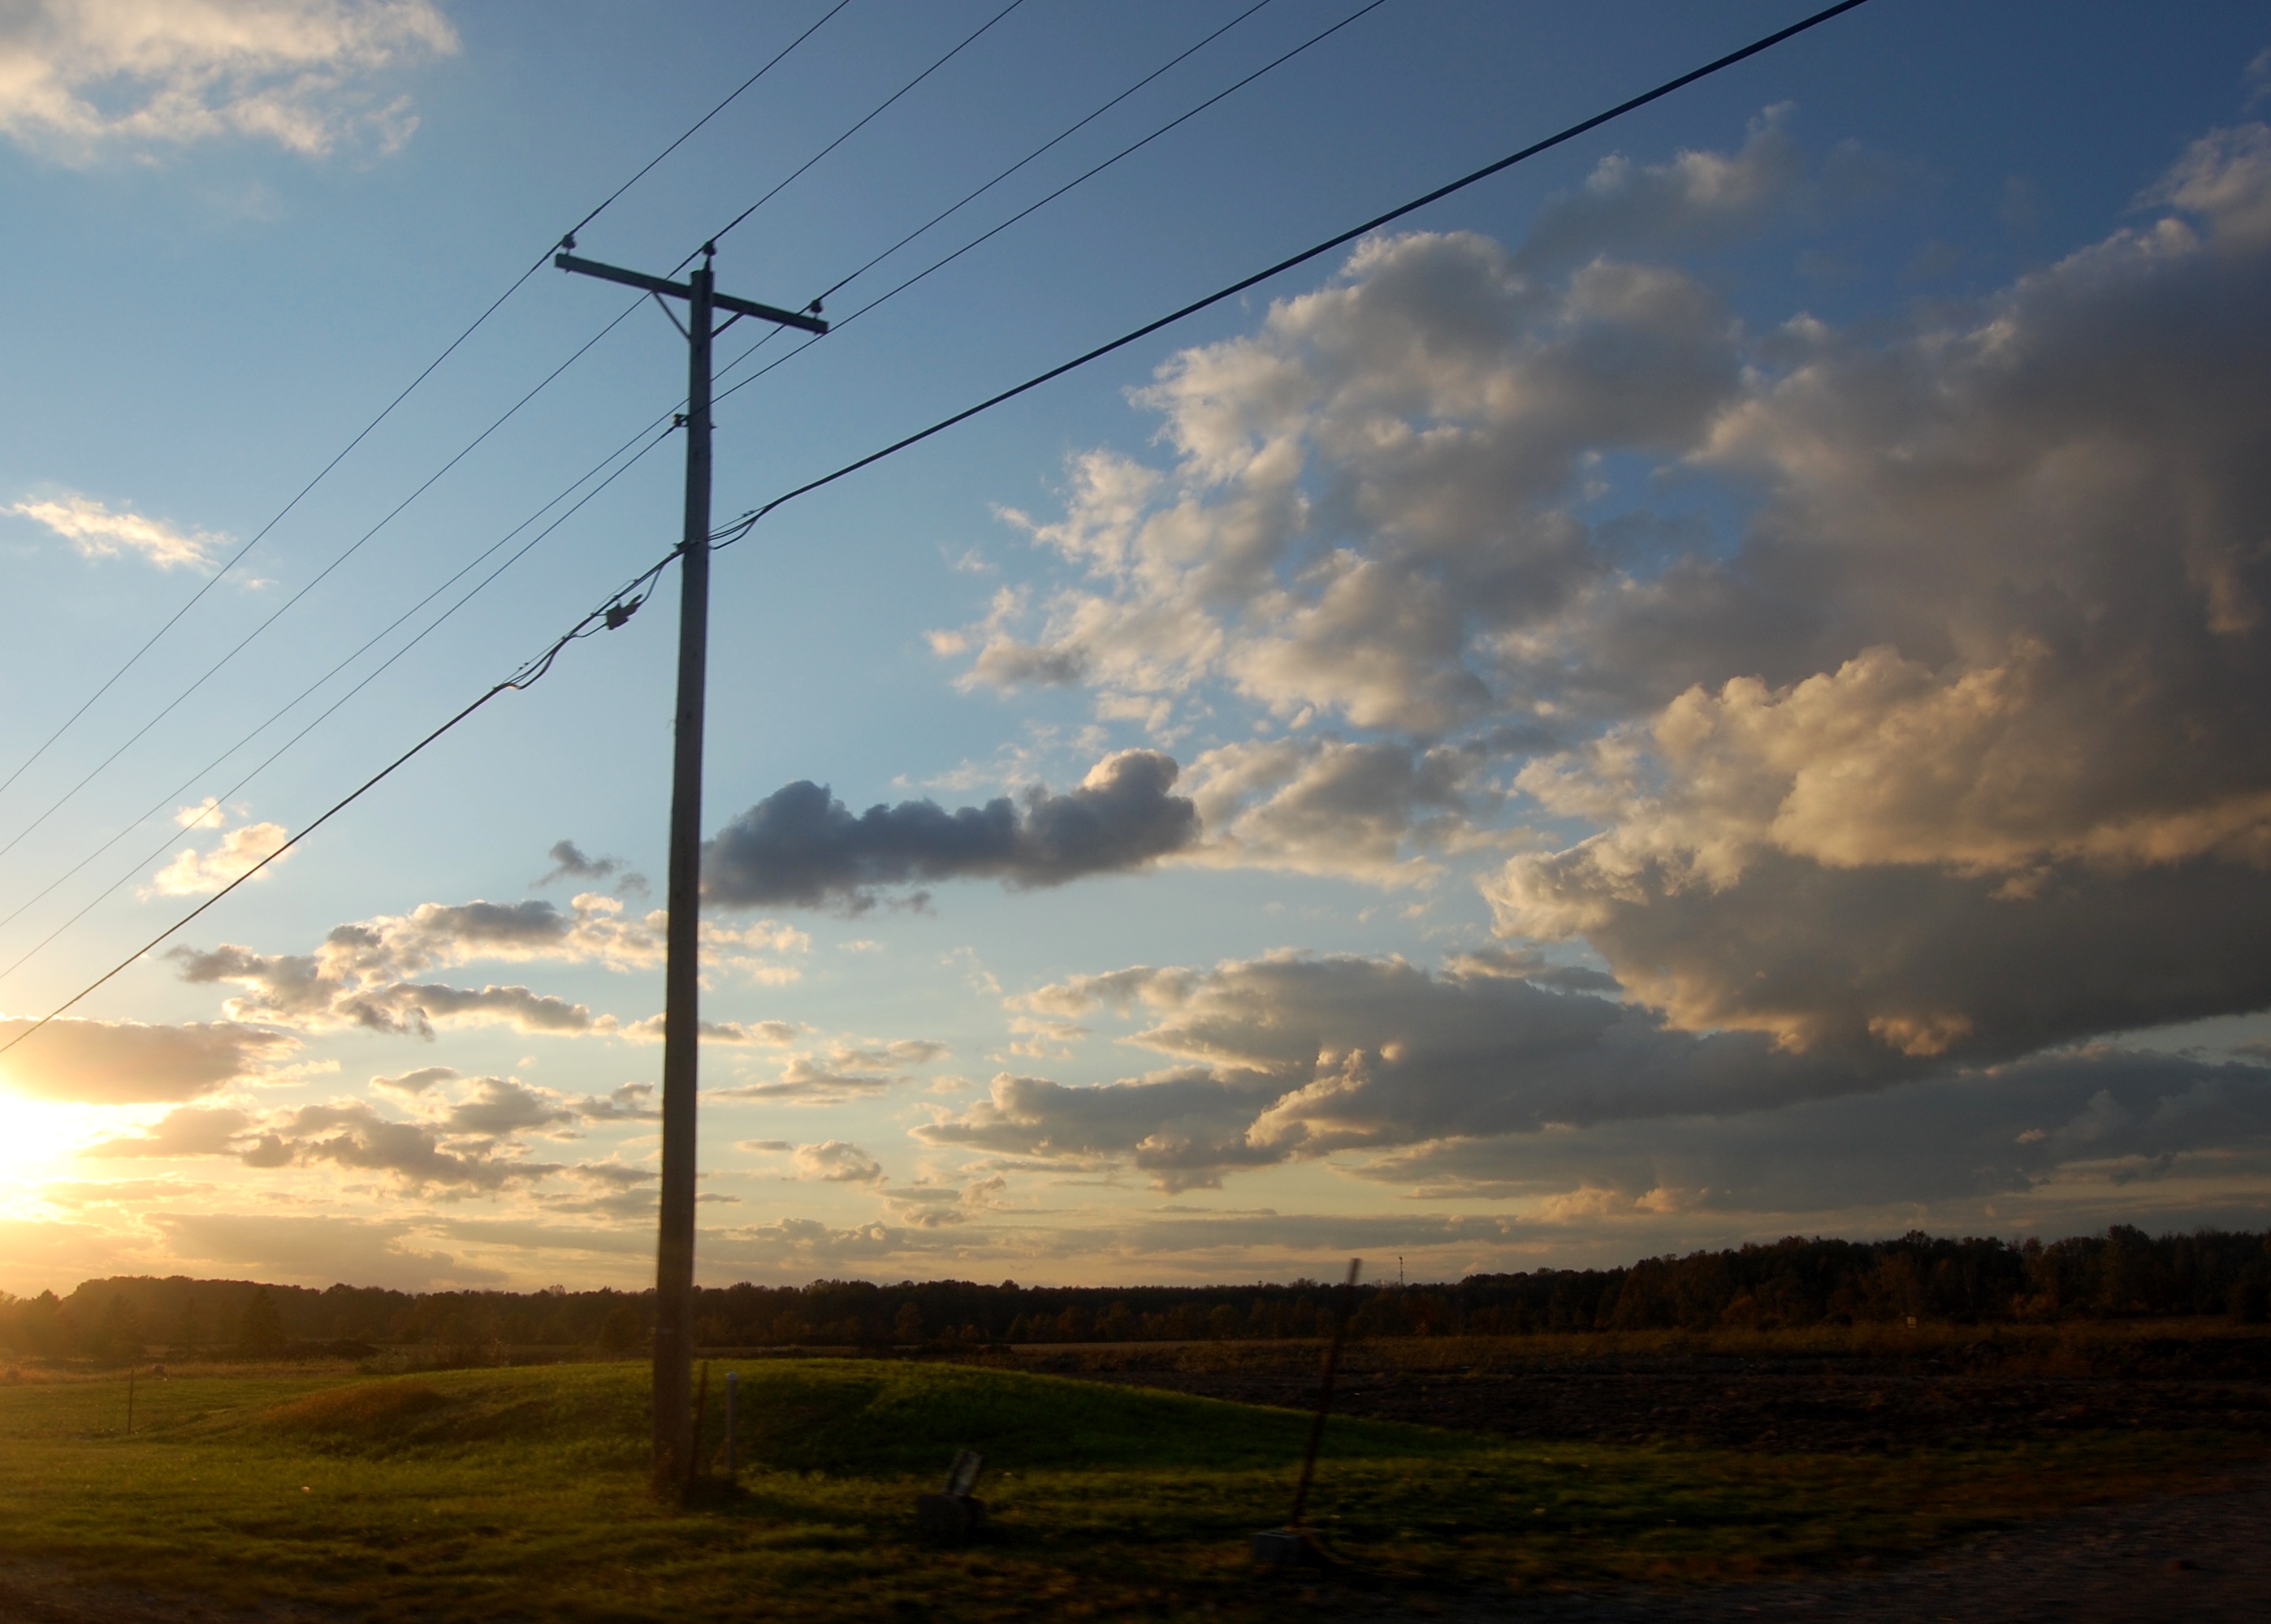 Oberlin fields with telephone pole